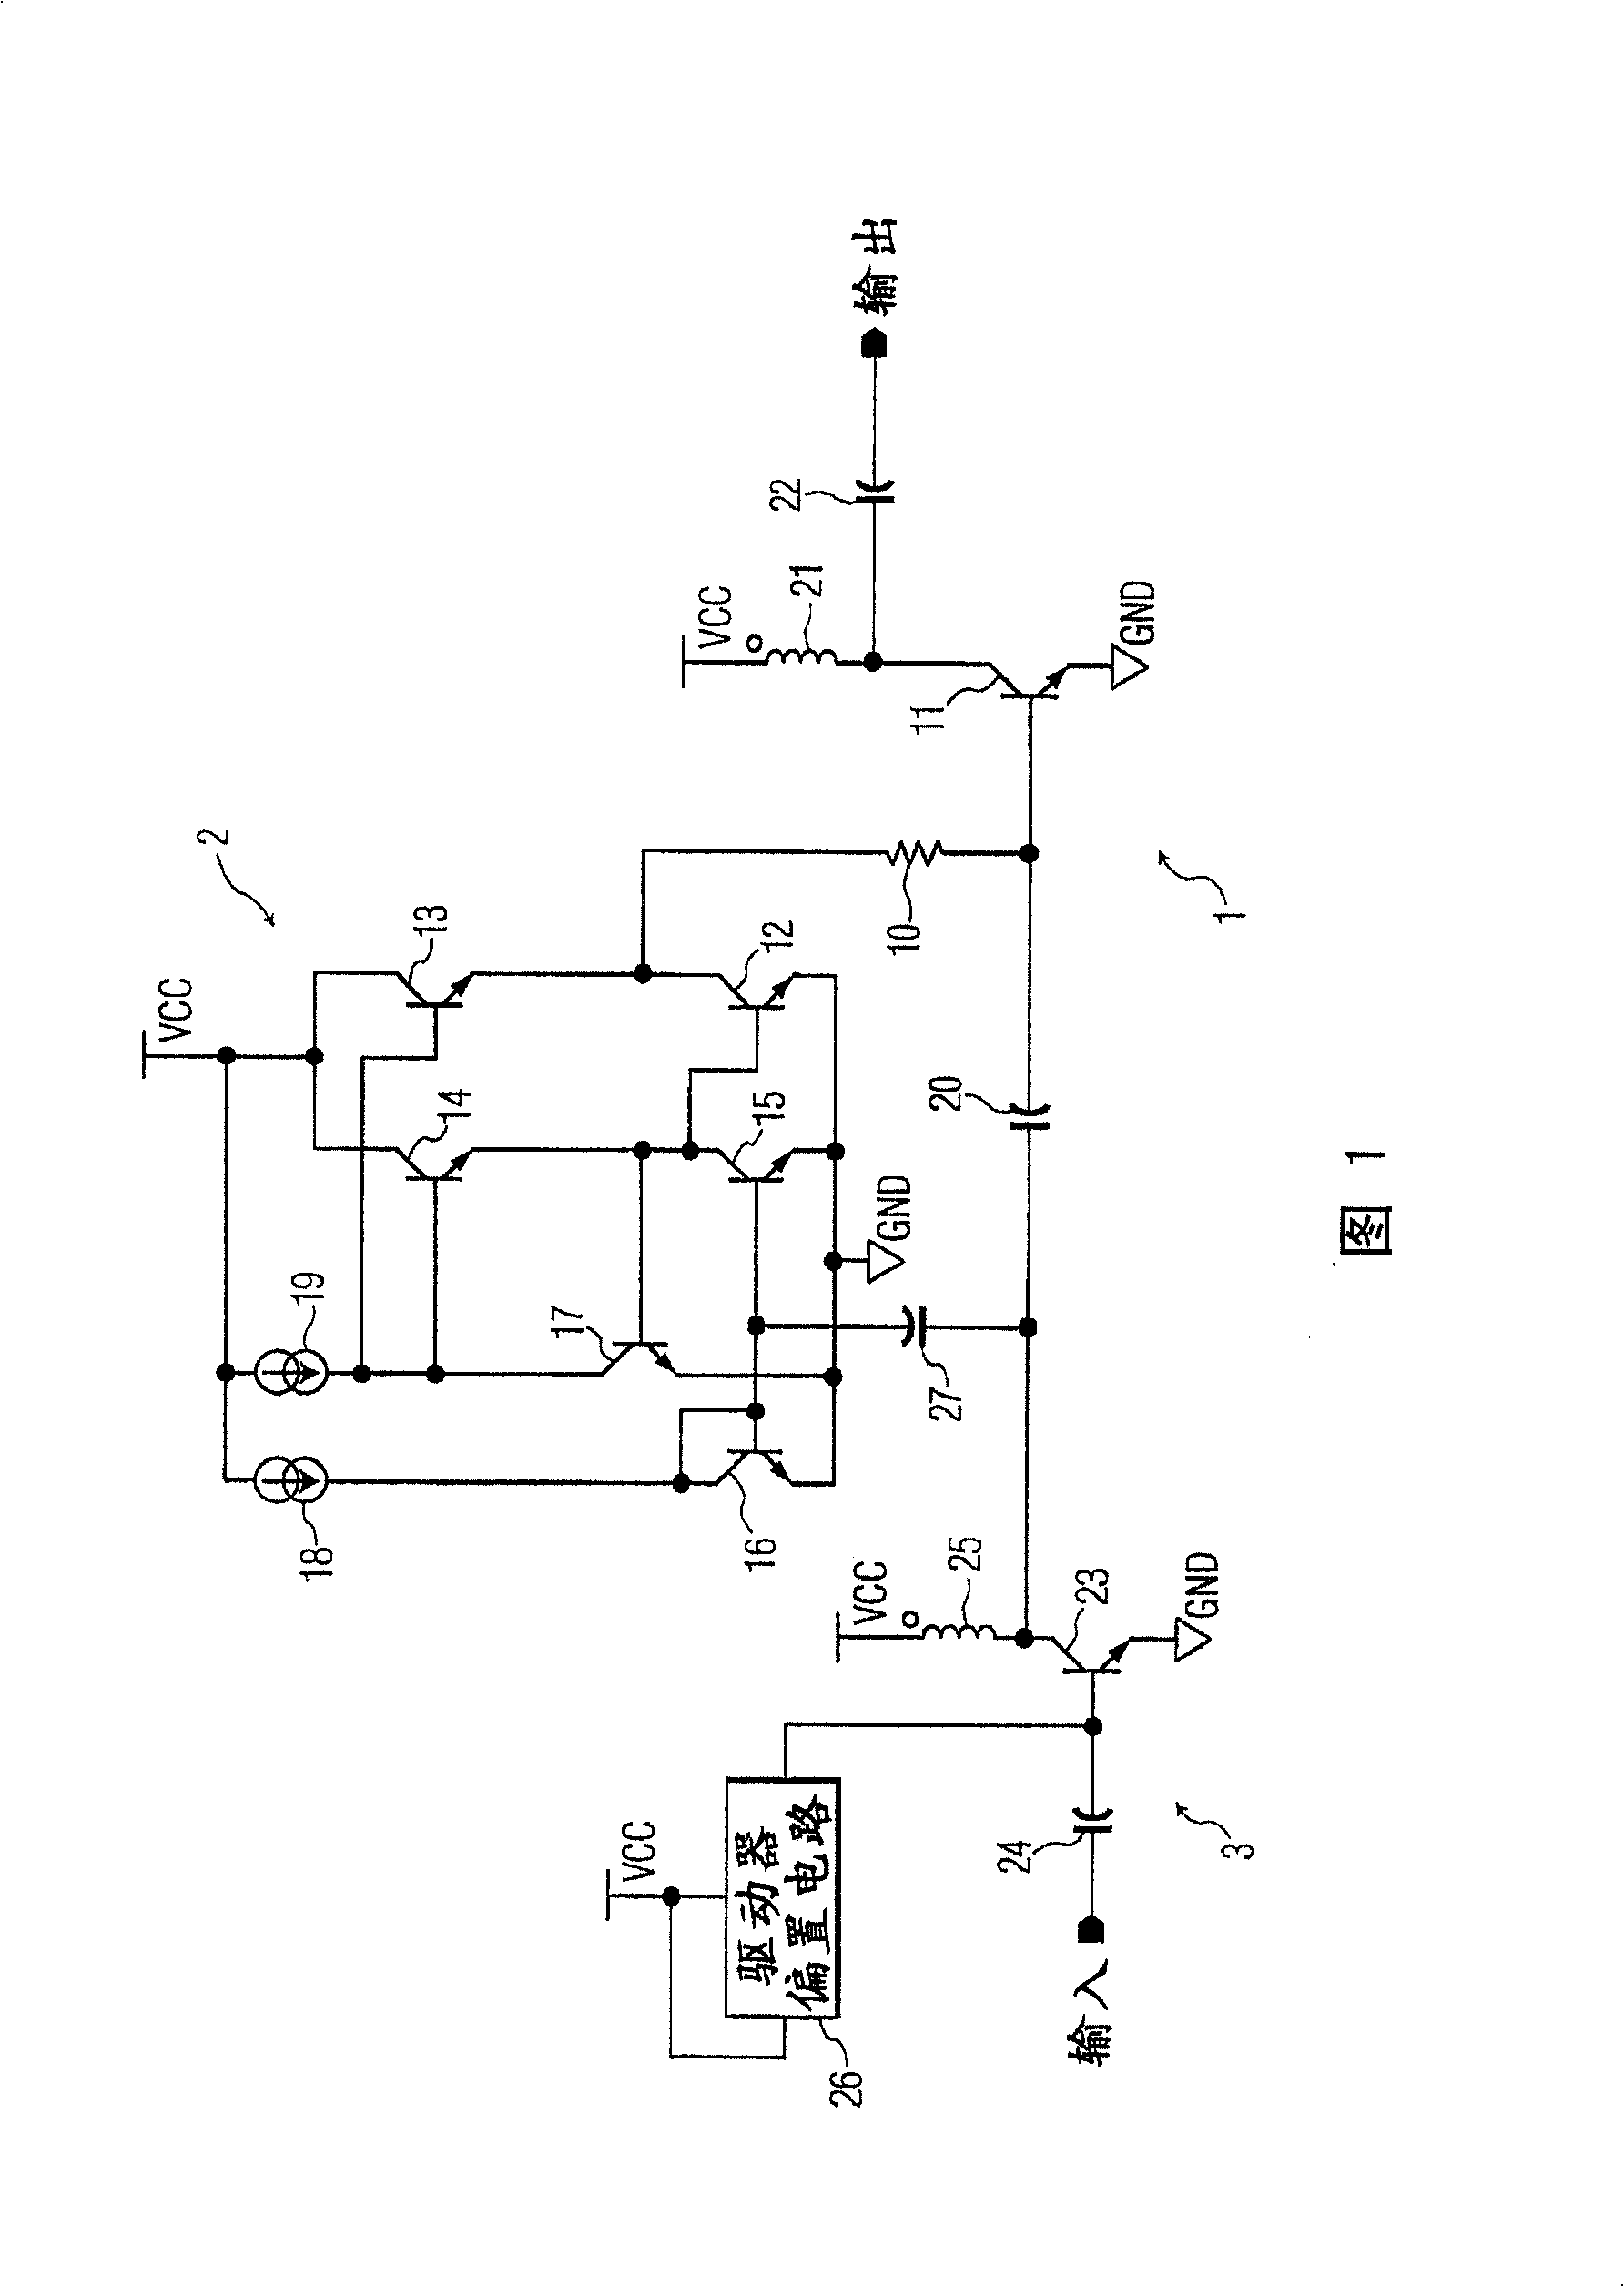 Capacitor coupled dynamic bias boosting circuit for a power amplifier